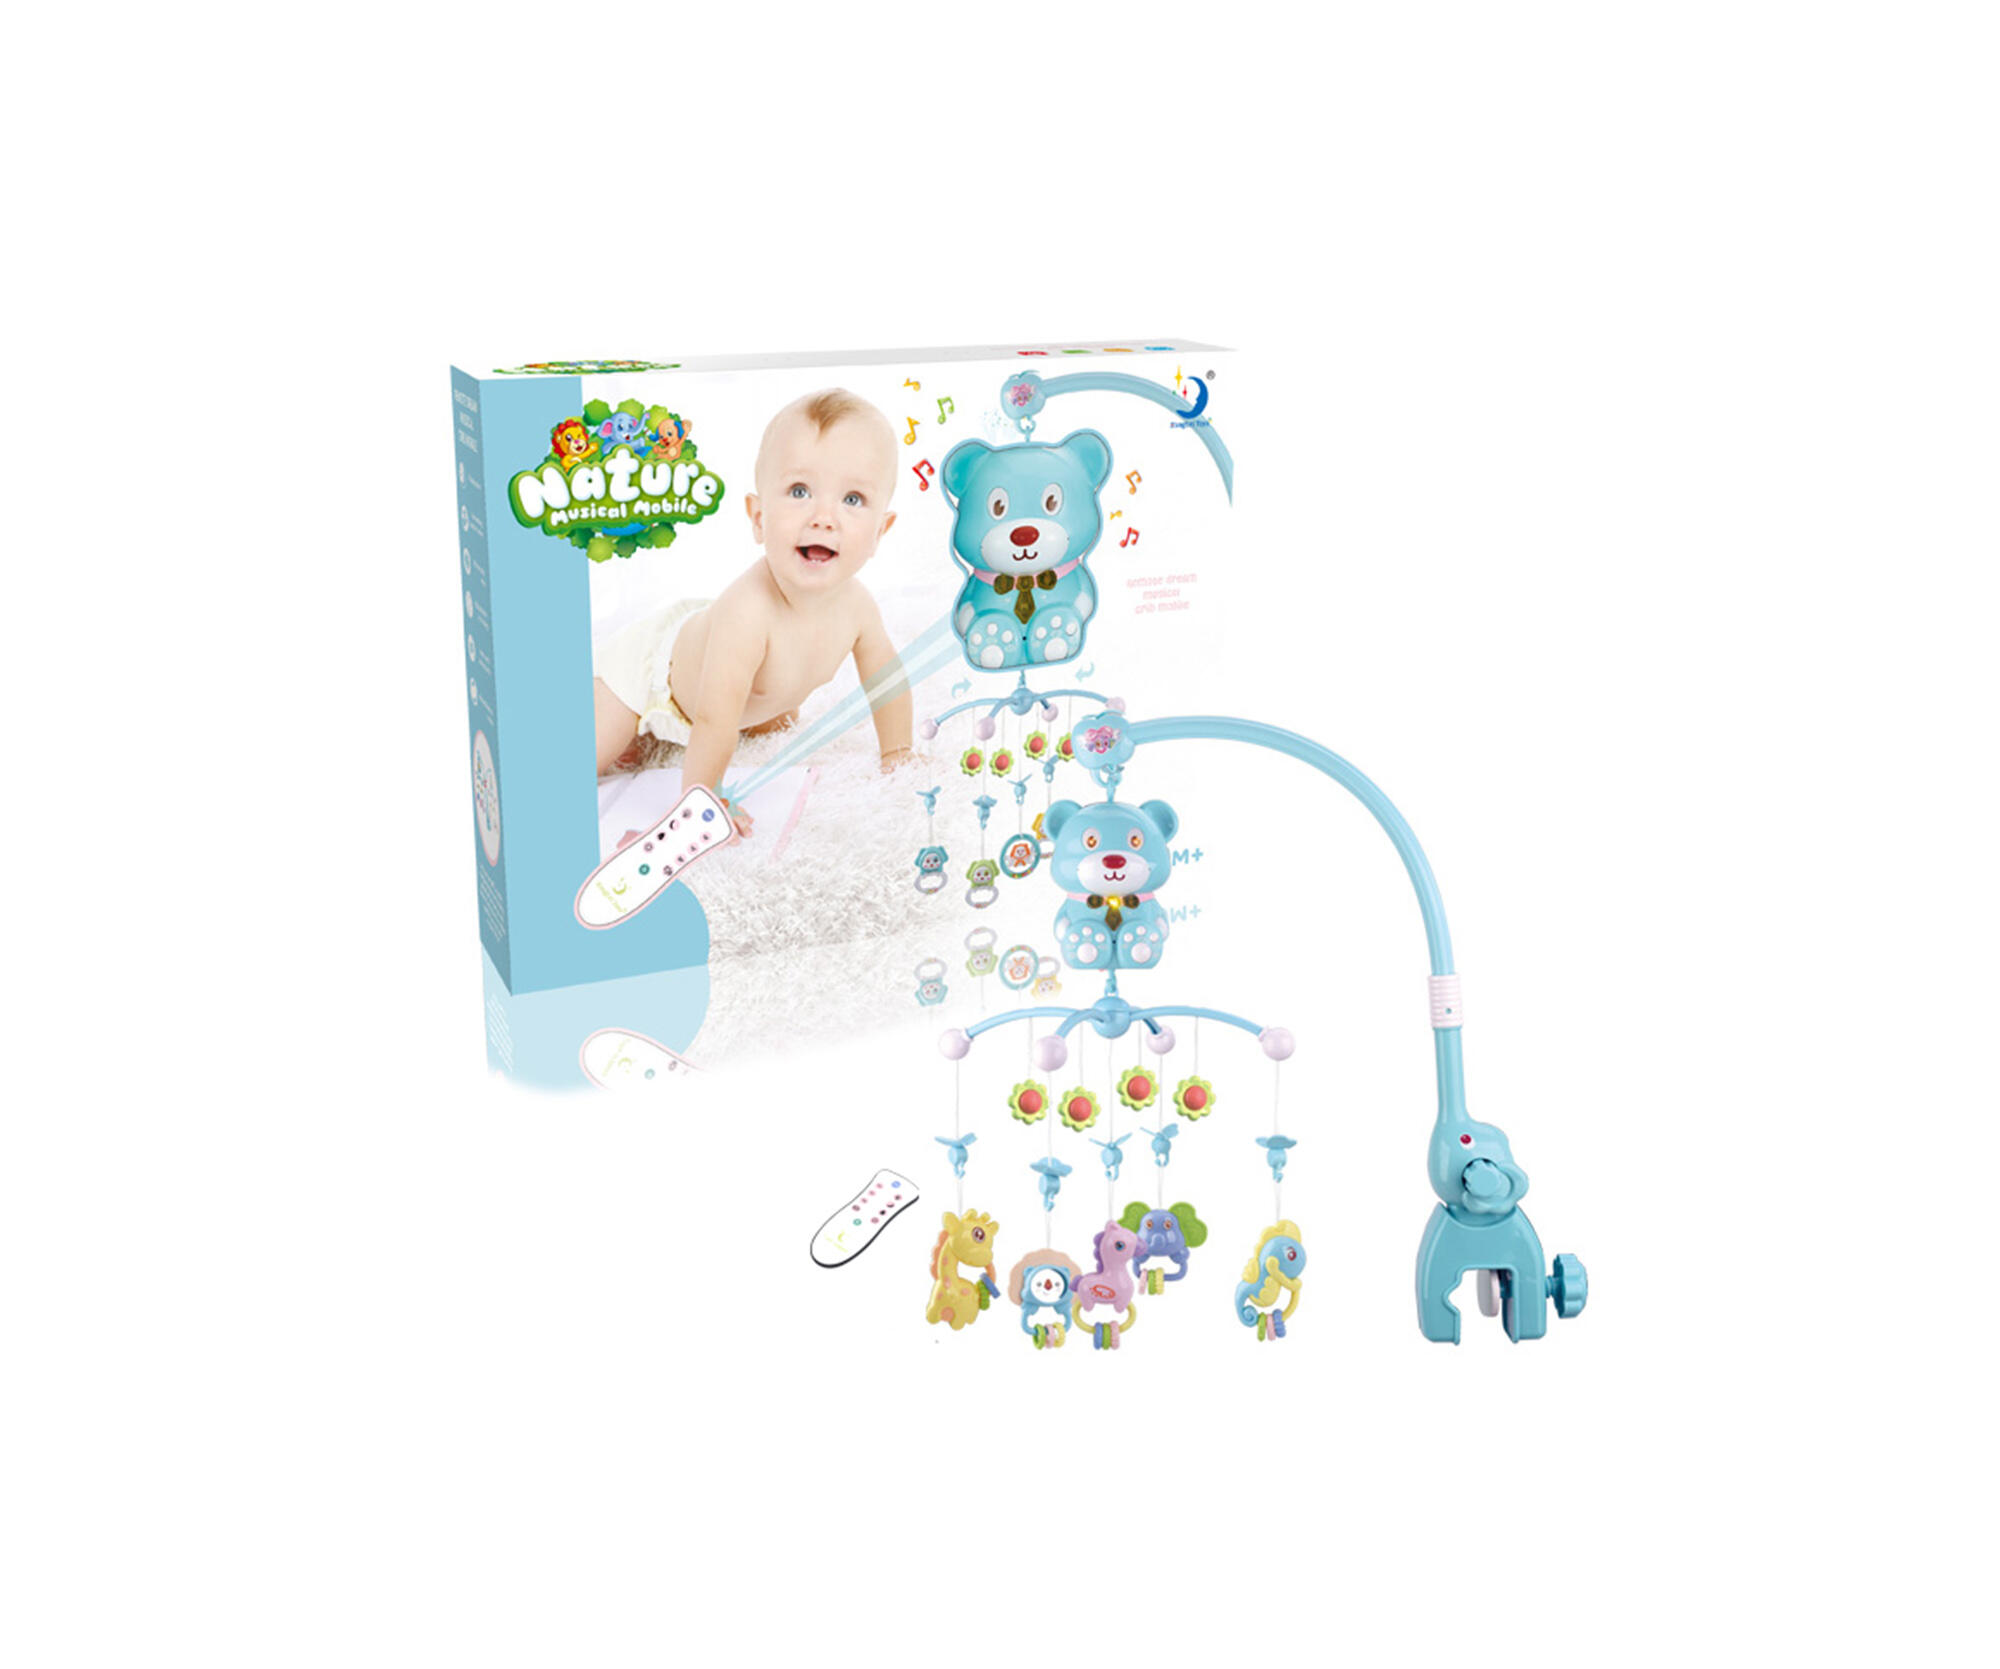 R/C BABY MOBILE SET WITH MUSIC AND PROJECTION